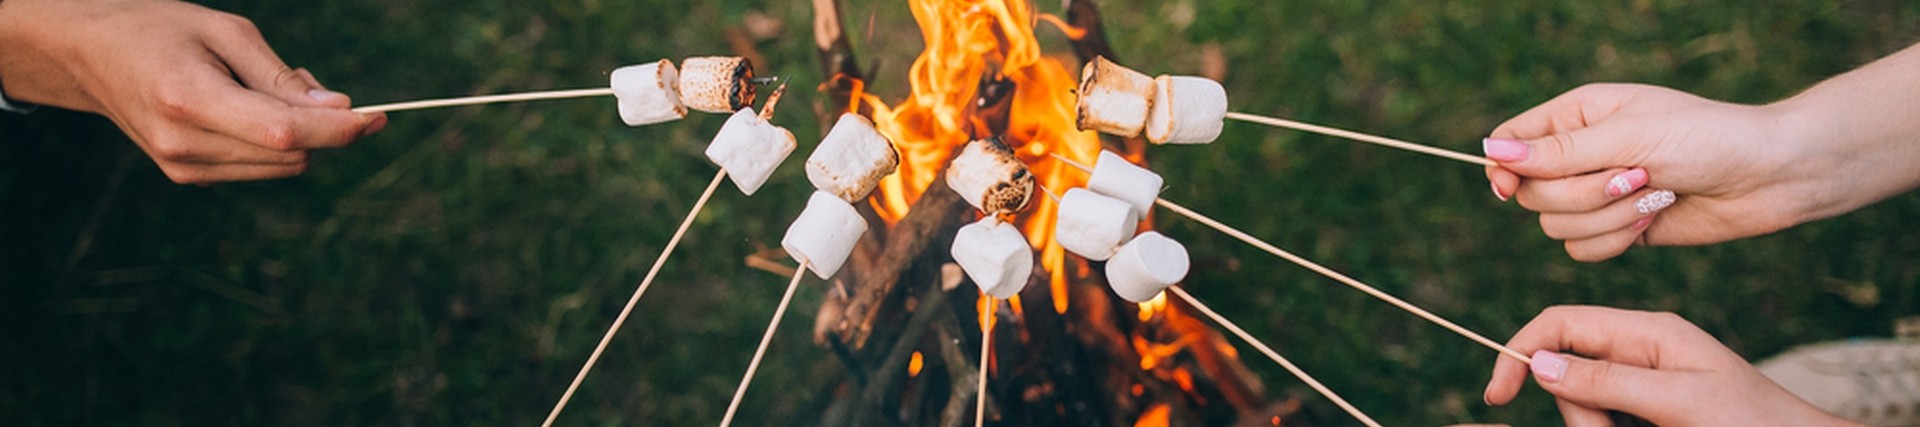 Fire and marshmallows